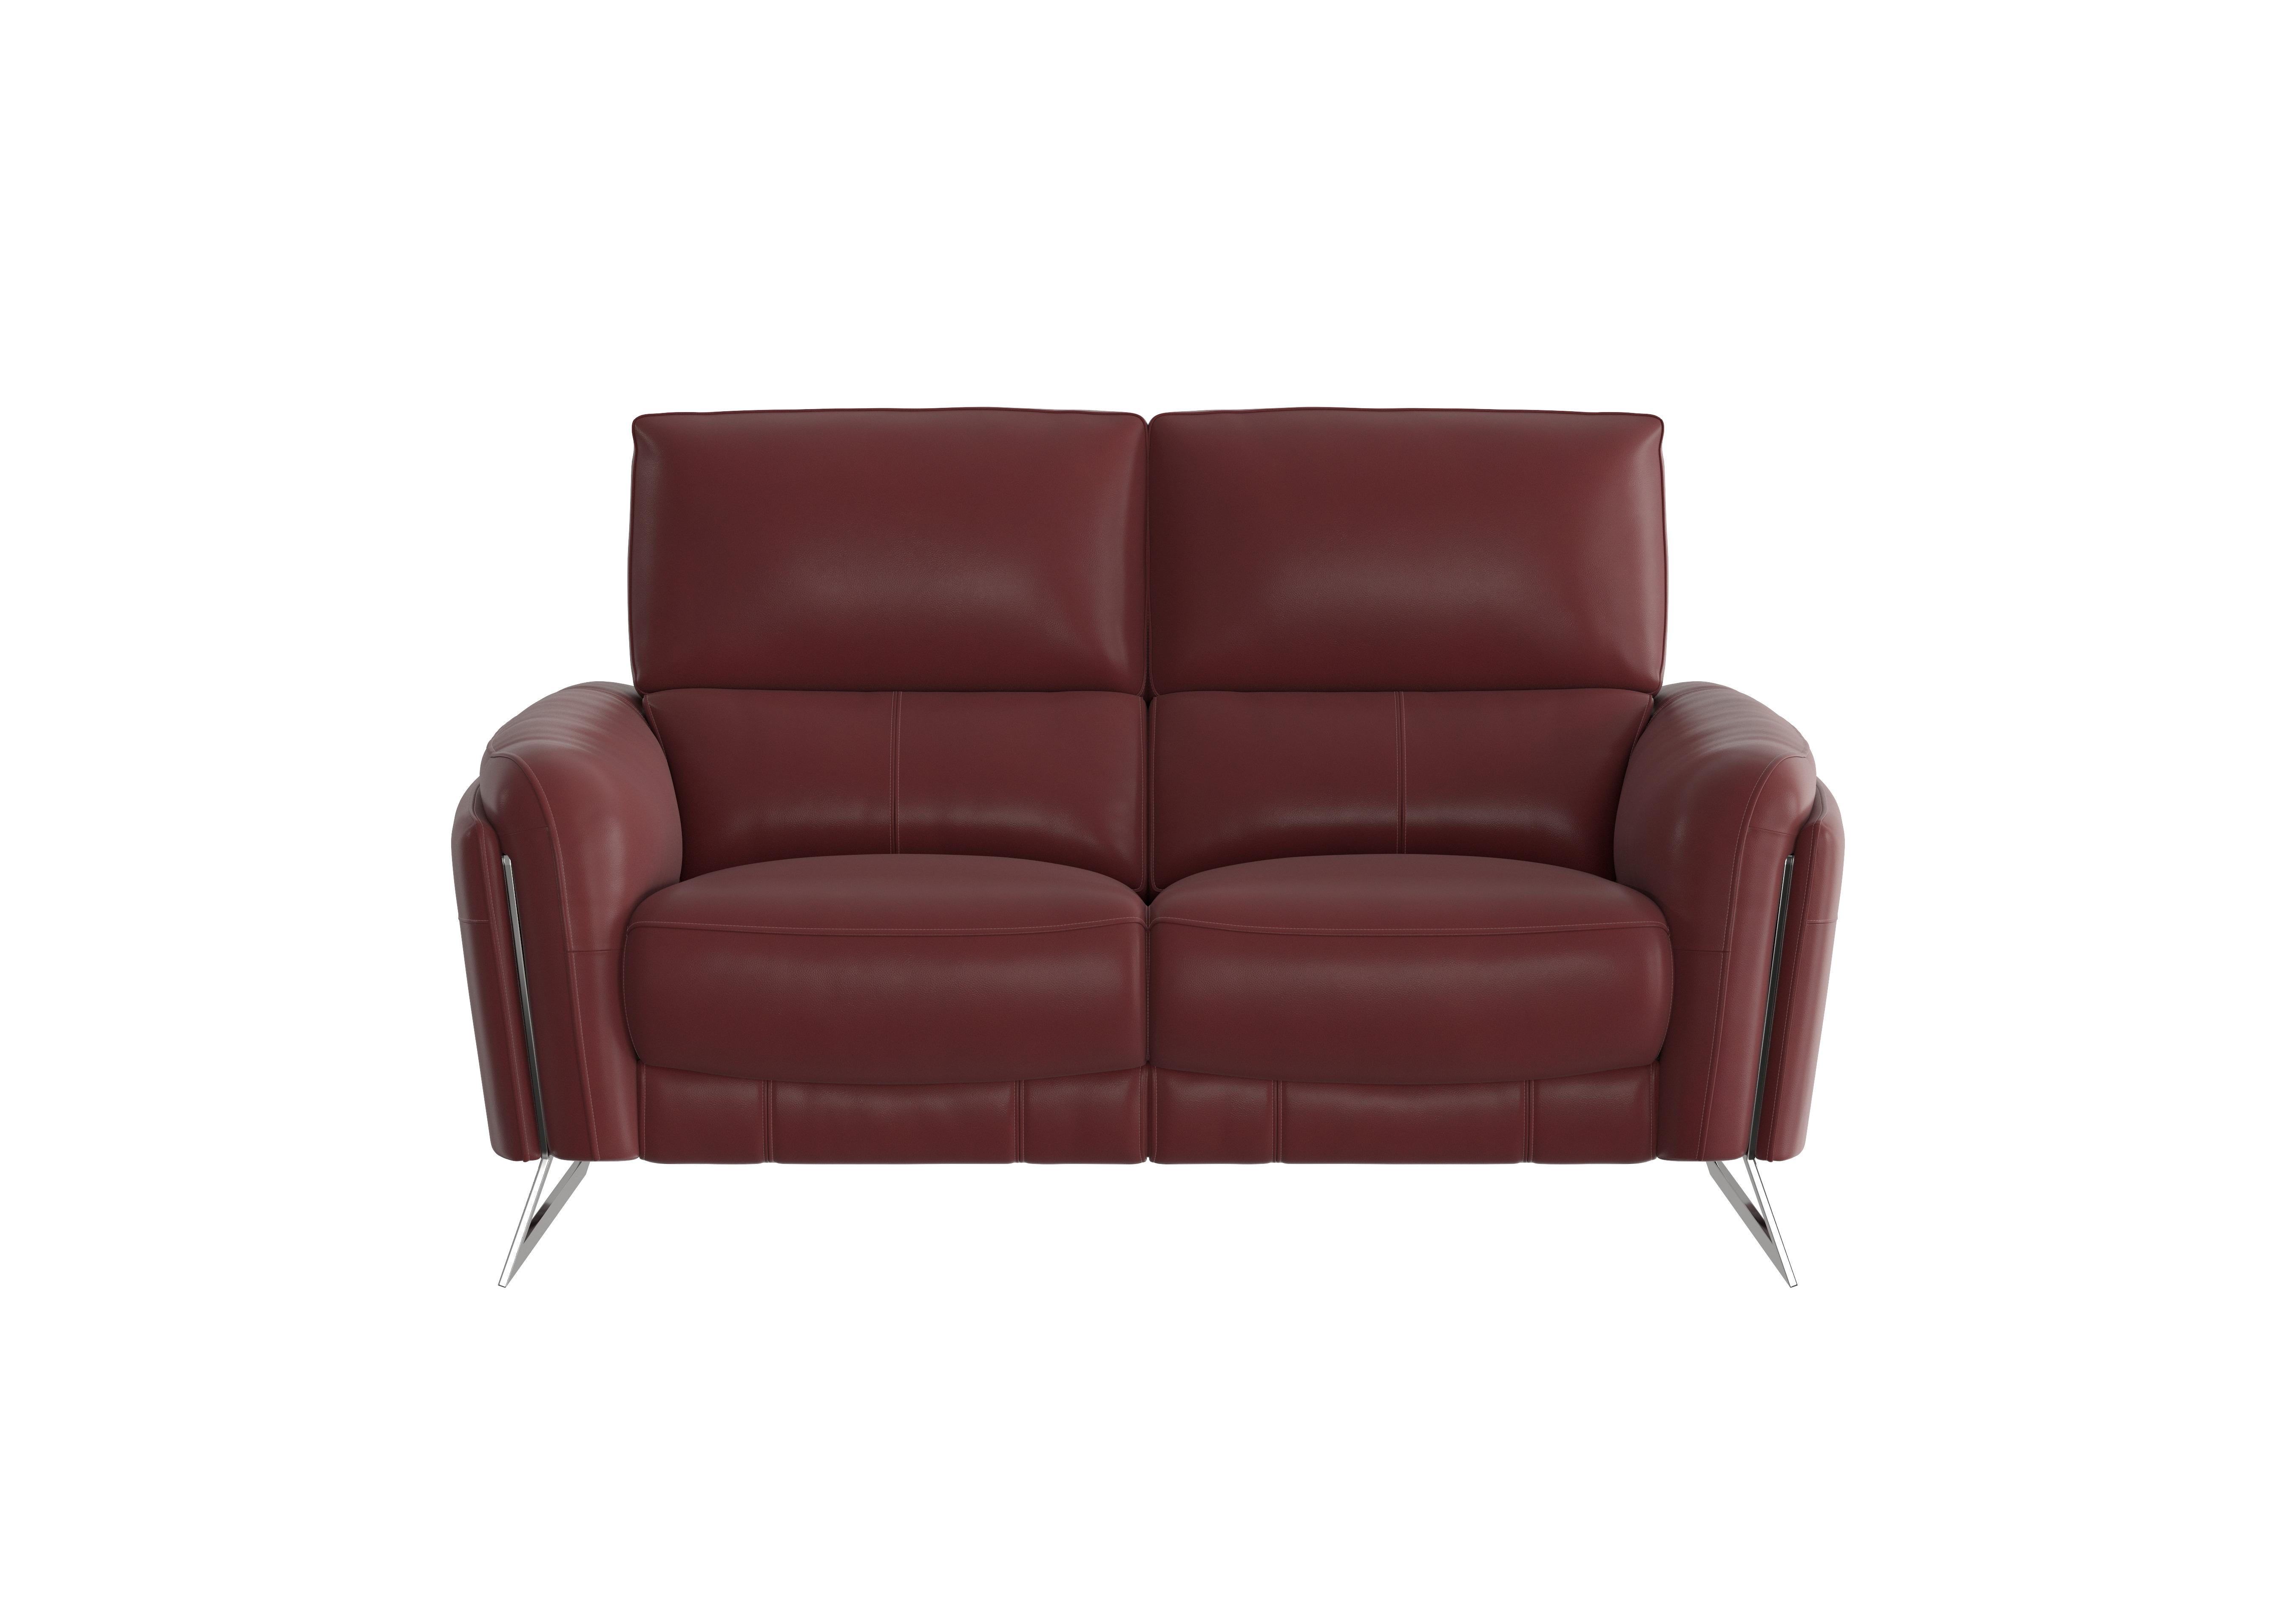 Amarilla 2 Seater Leather Sofa in Bv-035c Deep Red on Furniture Village